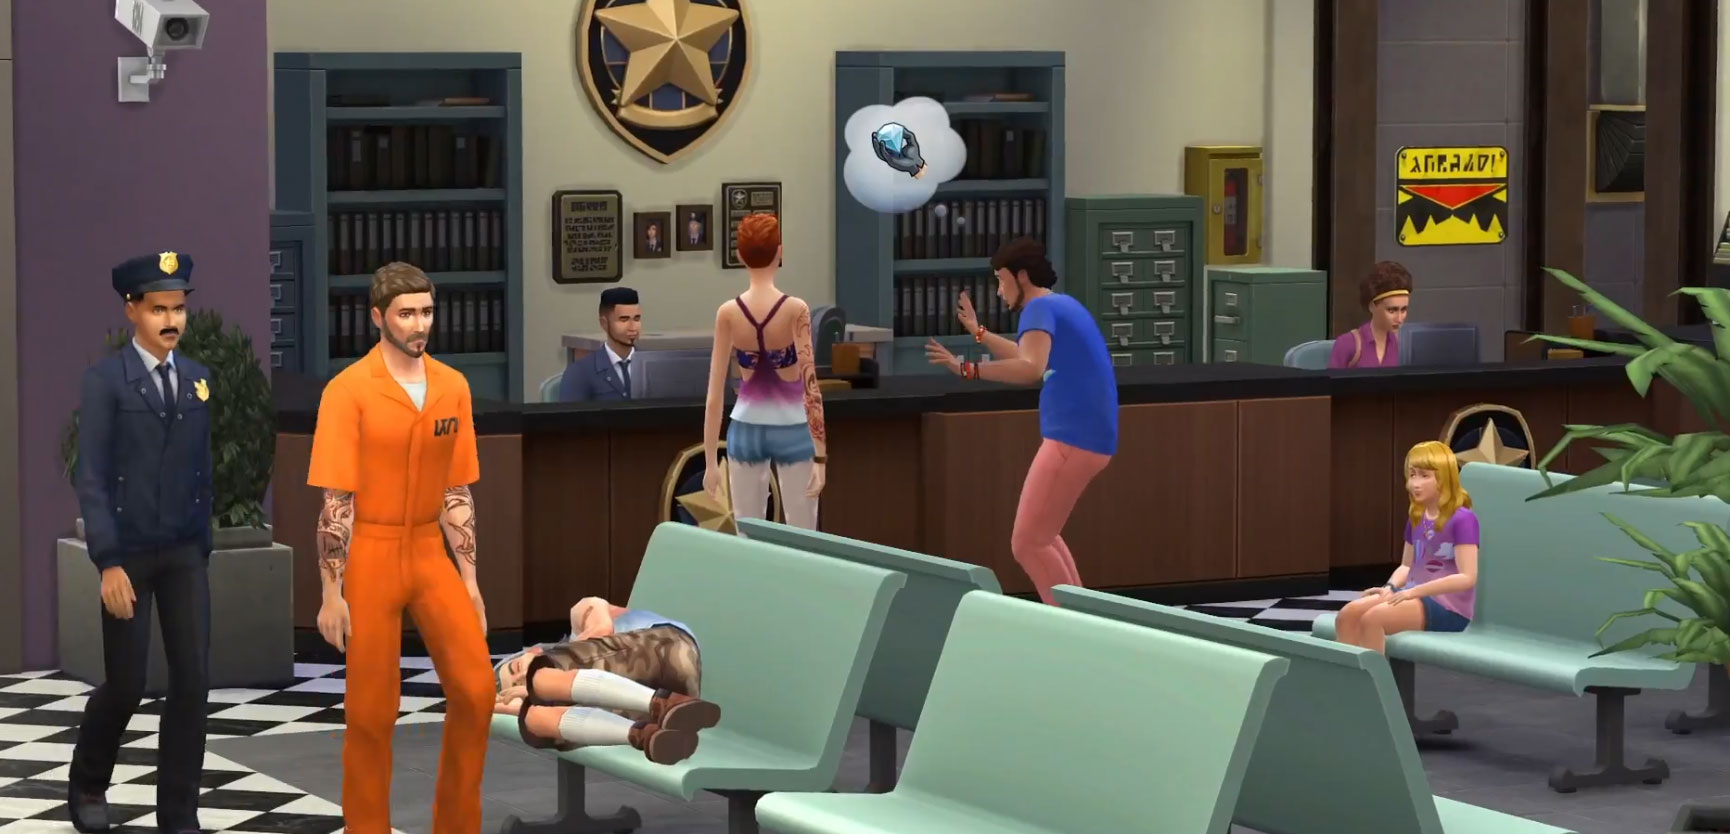 Sims 4 Get To Work Expansion Inside Police Station 